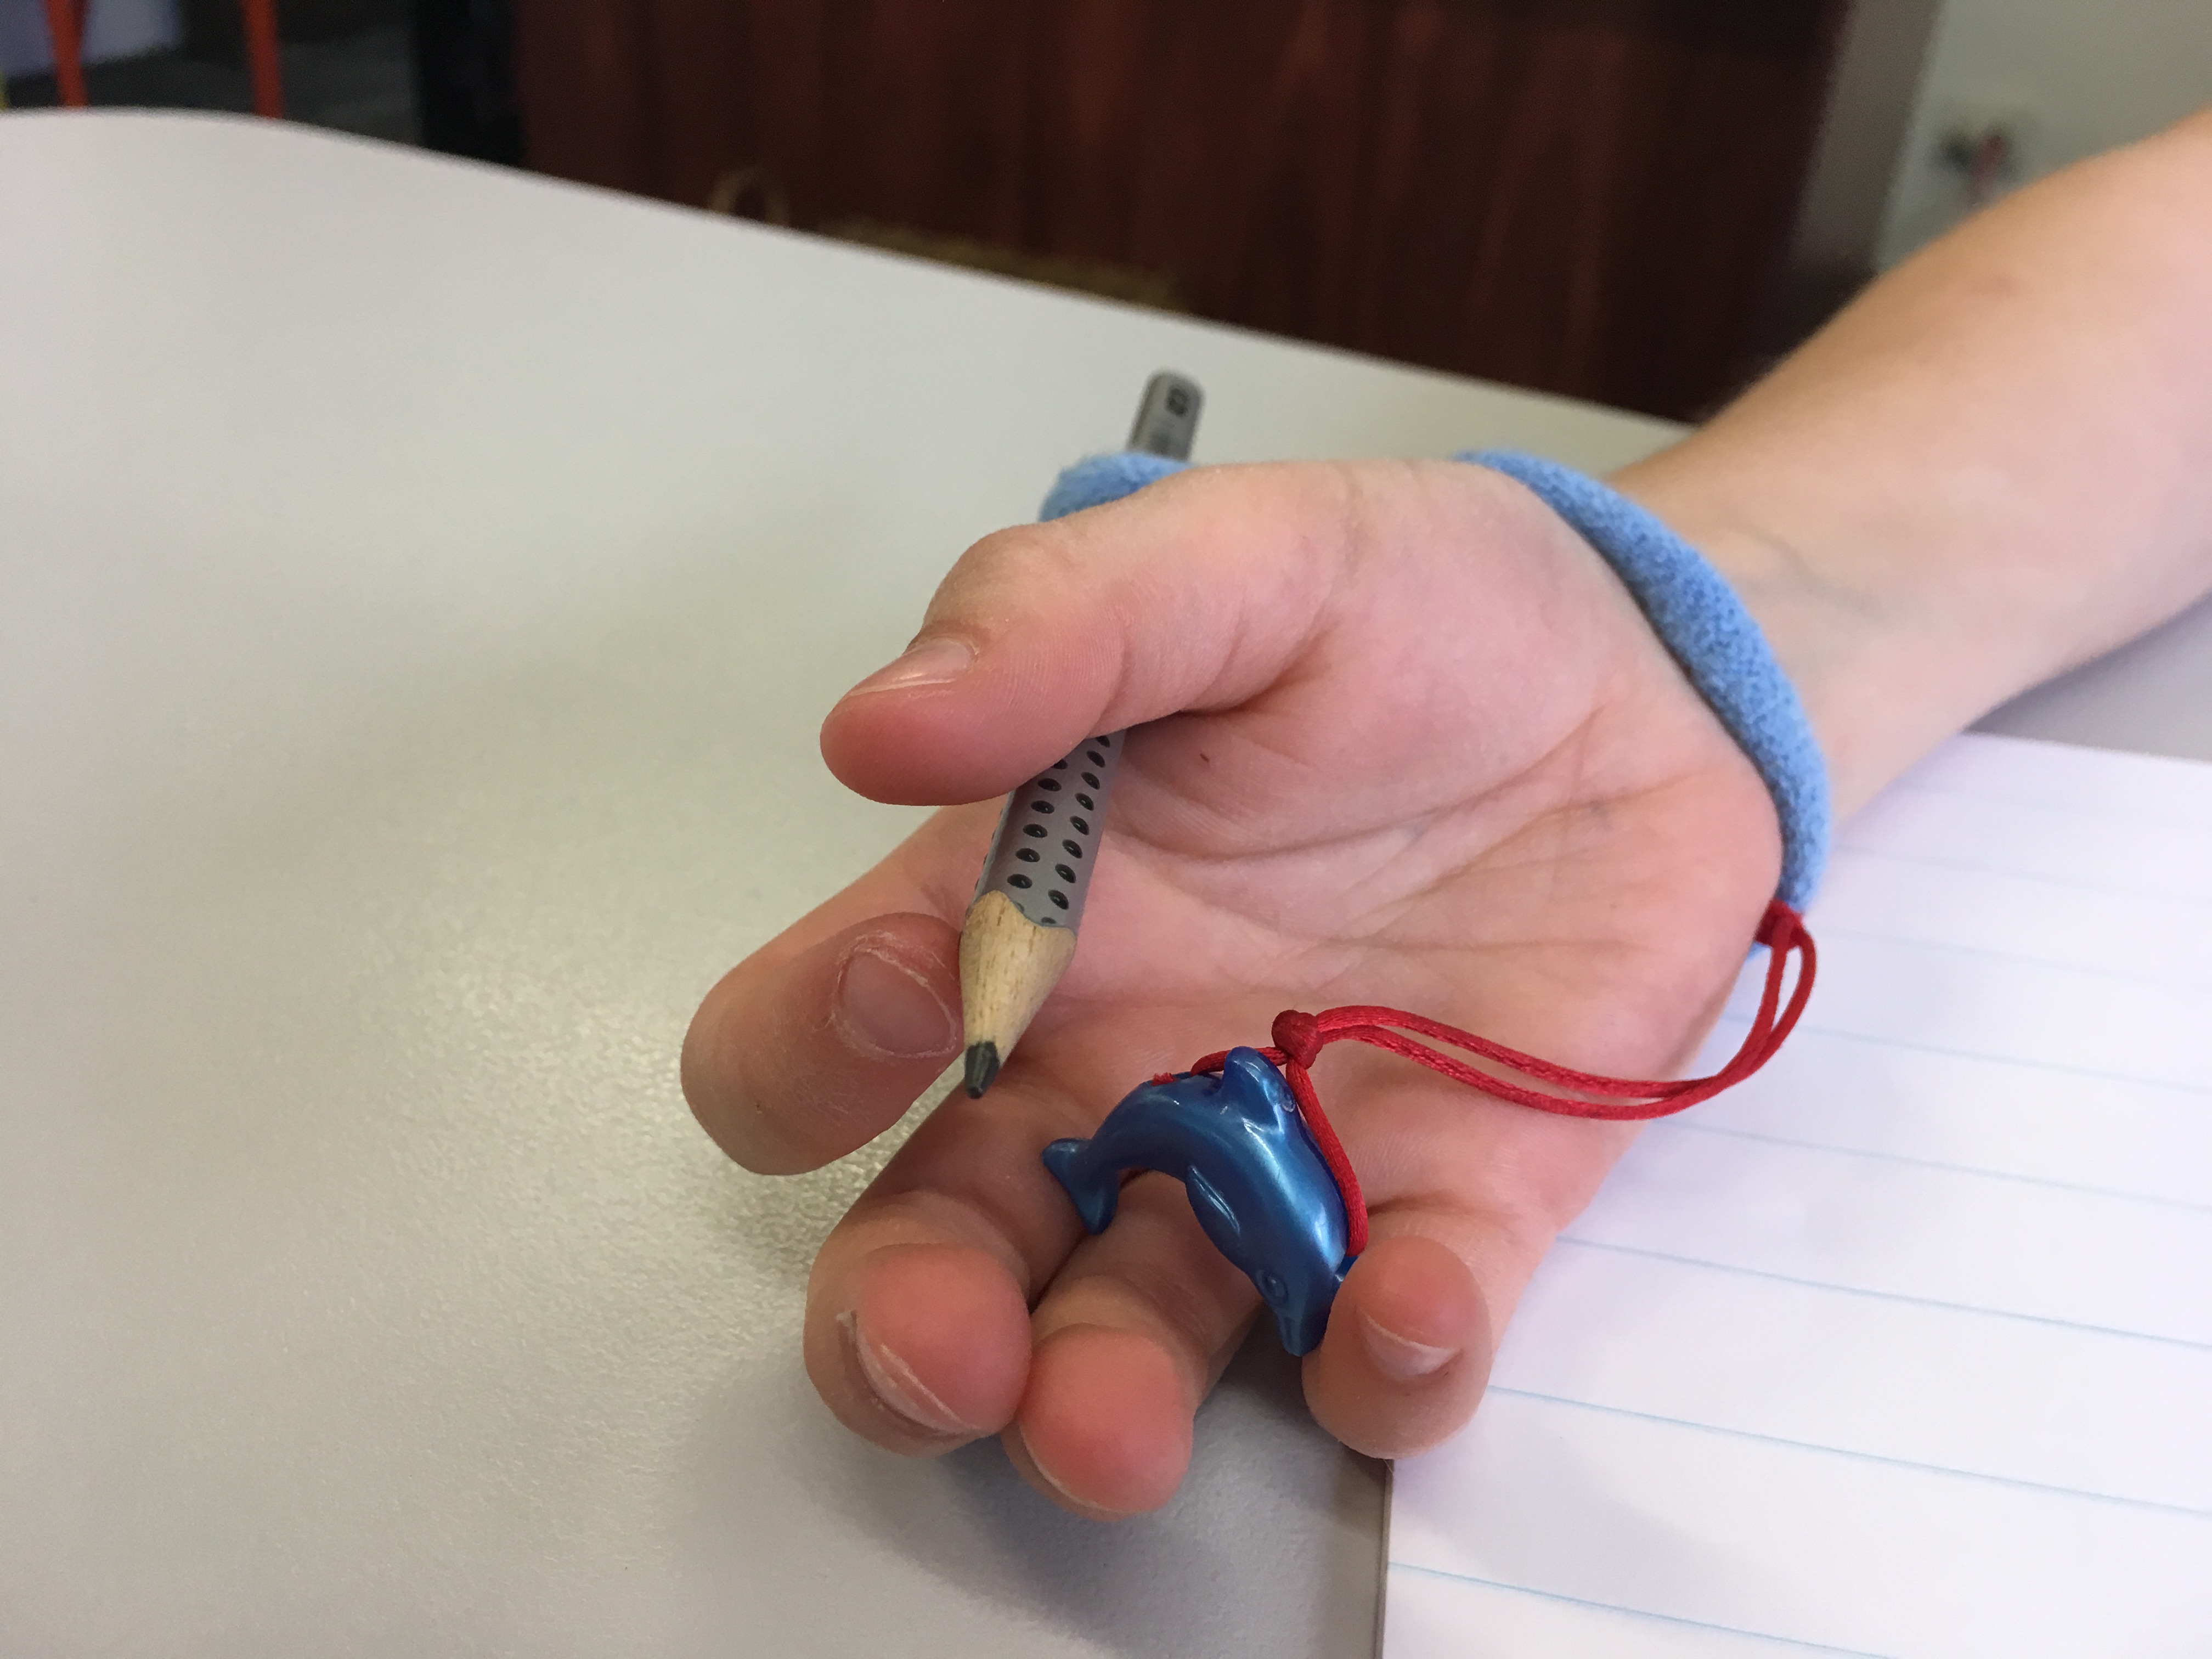 Pencil grip with string attached, showing device in hand